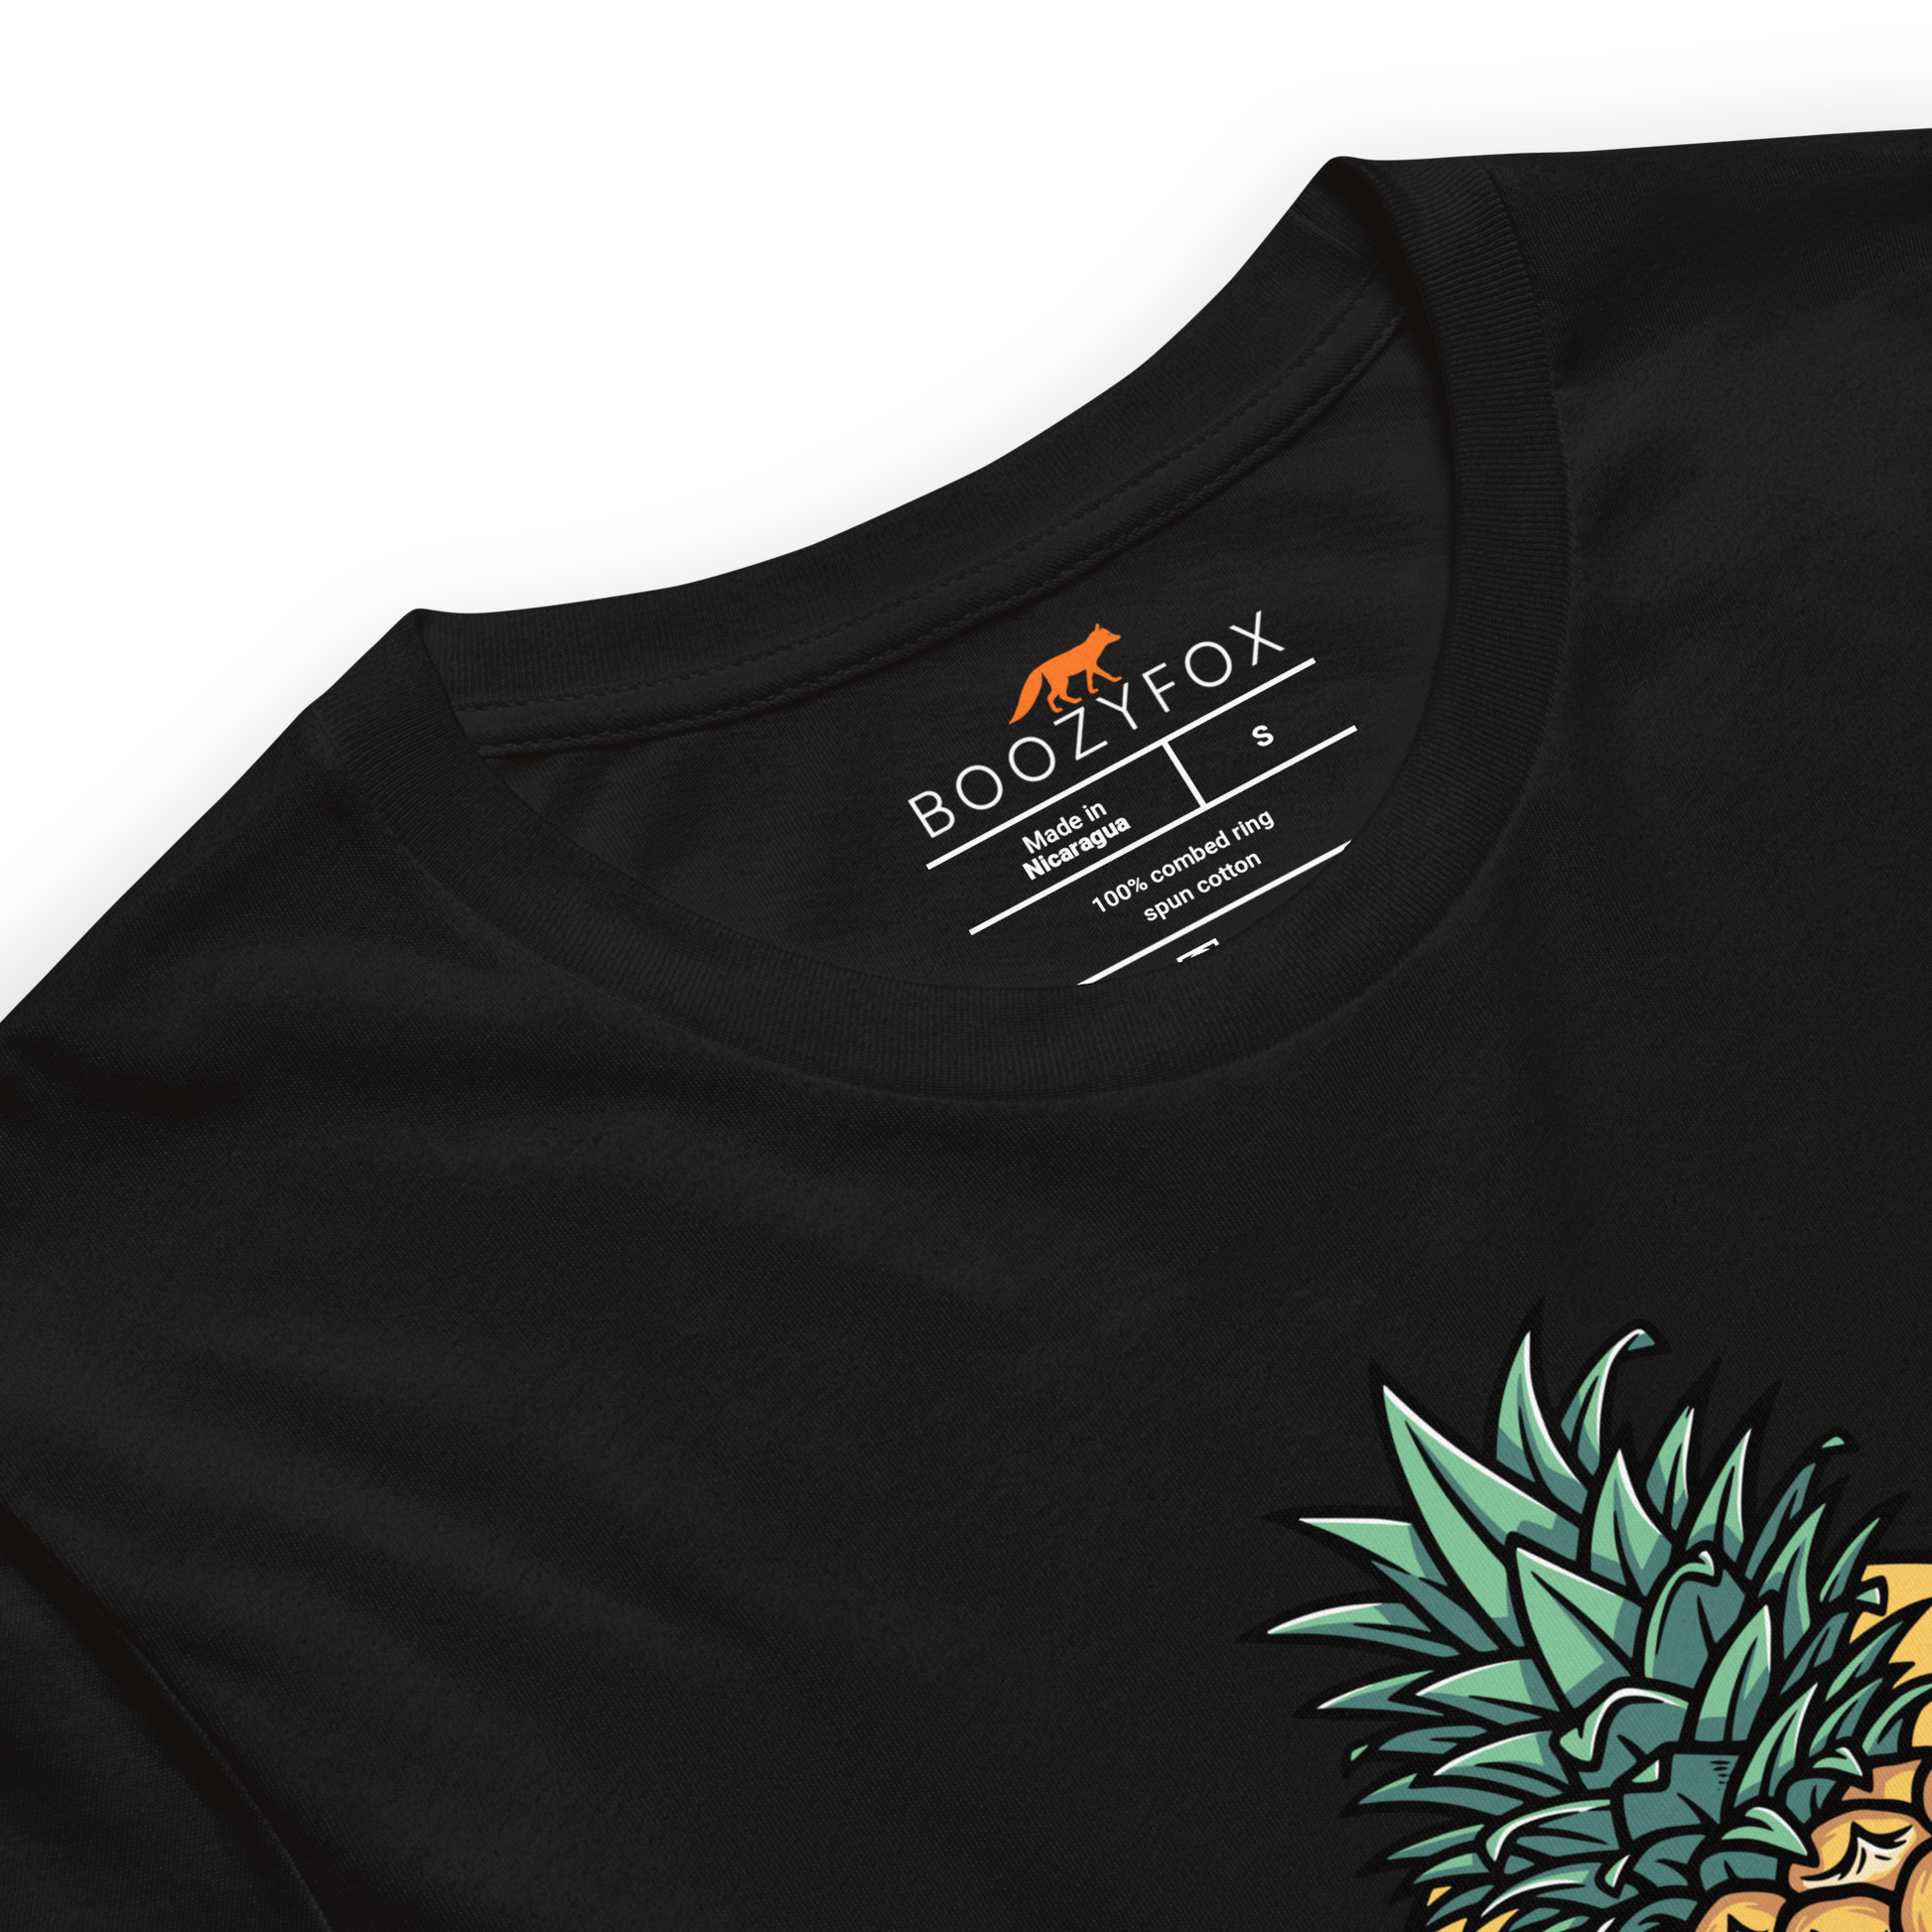 Product details of a Black Premium Tropical Mayhem Tee featuring a Crazy Pineapple Skull graphic on the chest - Funny Graphic Pineapple Tees - Boozy Fox